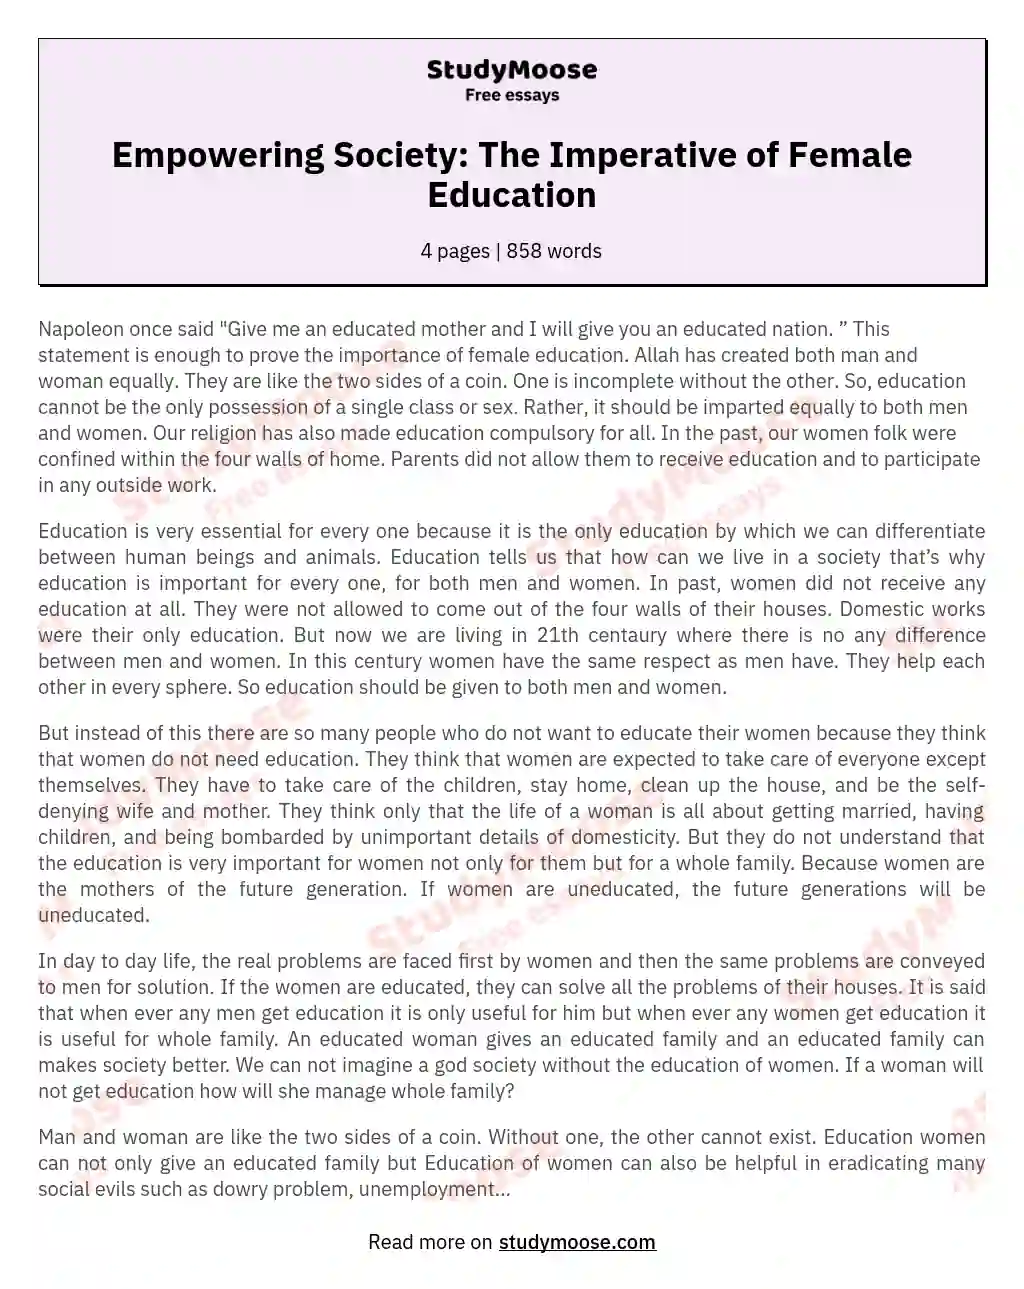 Empowering Society: The Imperative of Female Education essay